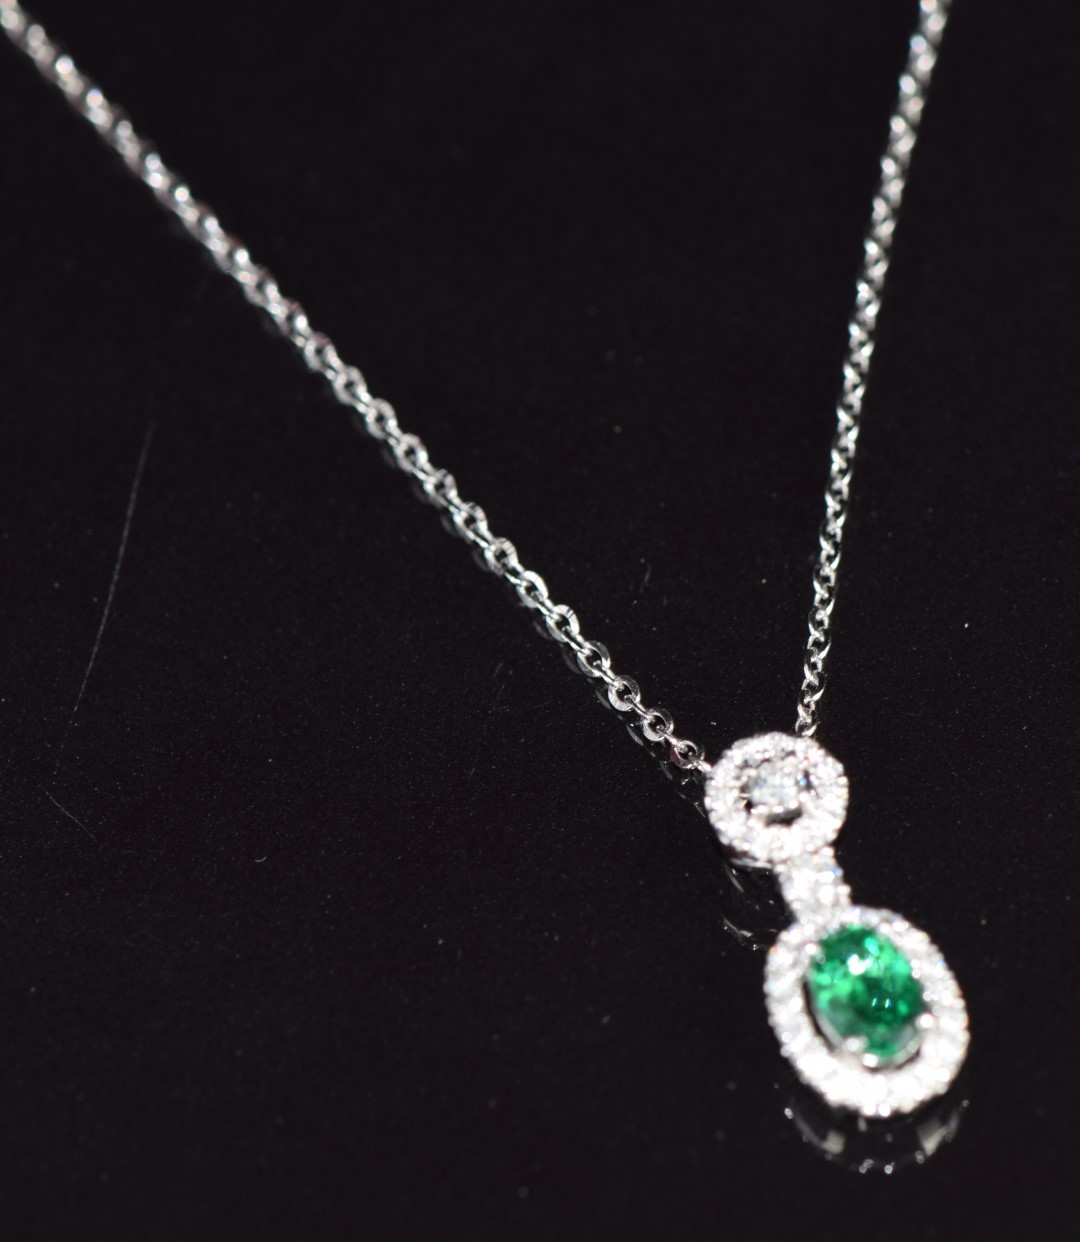 An 18ct white gold pendant set with an oval cut emerald of approximately 0.5ct surrounded by - Image 2 of 3